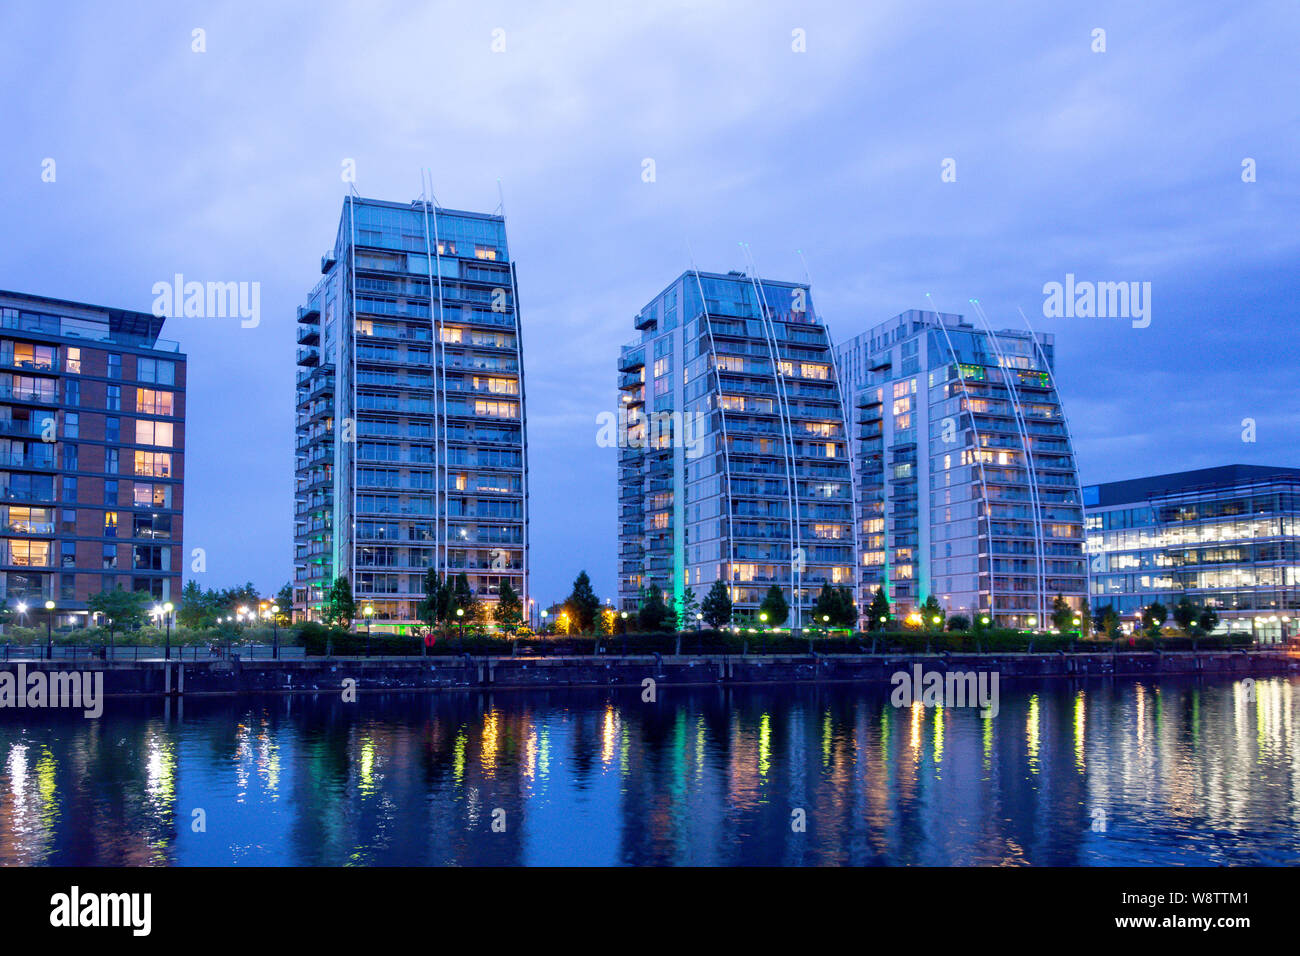 The NV high-rise apartment buildings at dusk, Salford Quays, Salford, Manchester, Greater Manchester, England, United Kingdom Stock Photo